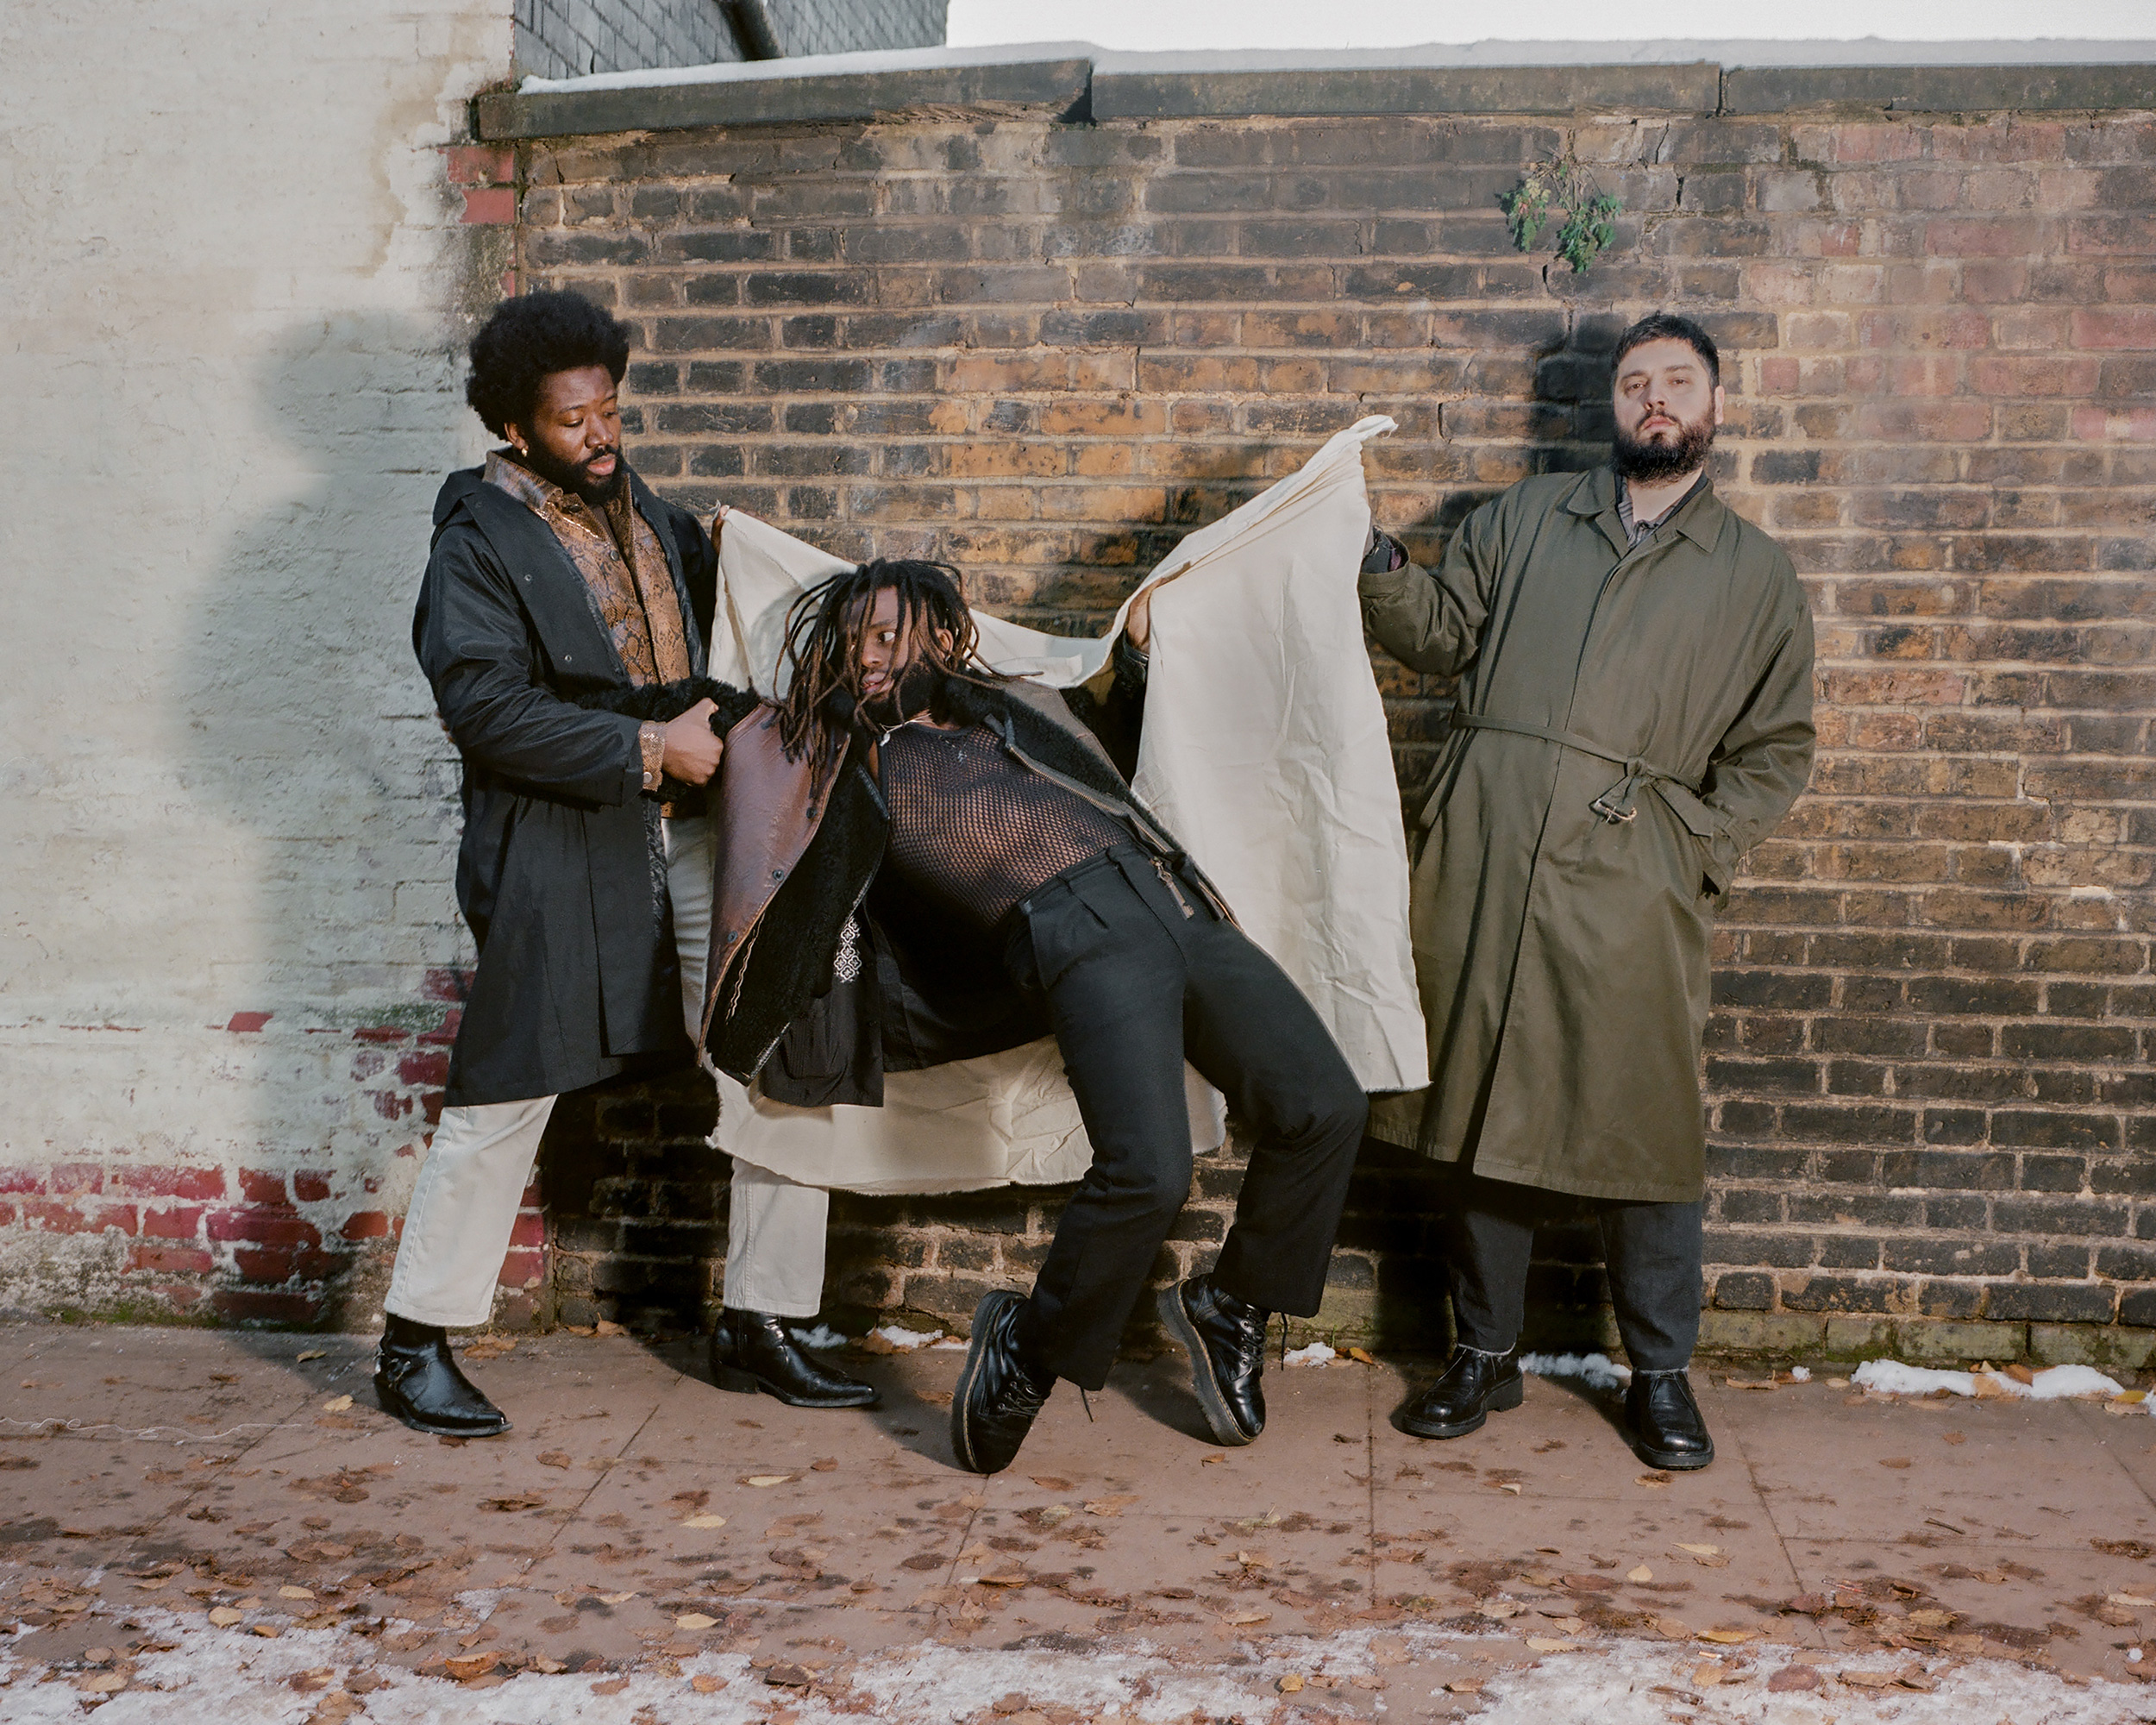 young fathers heavy heavy tour